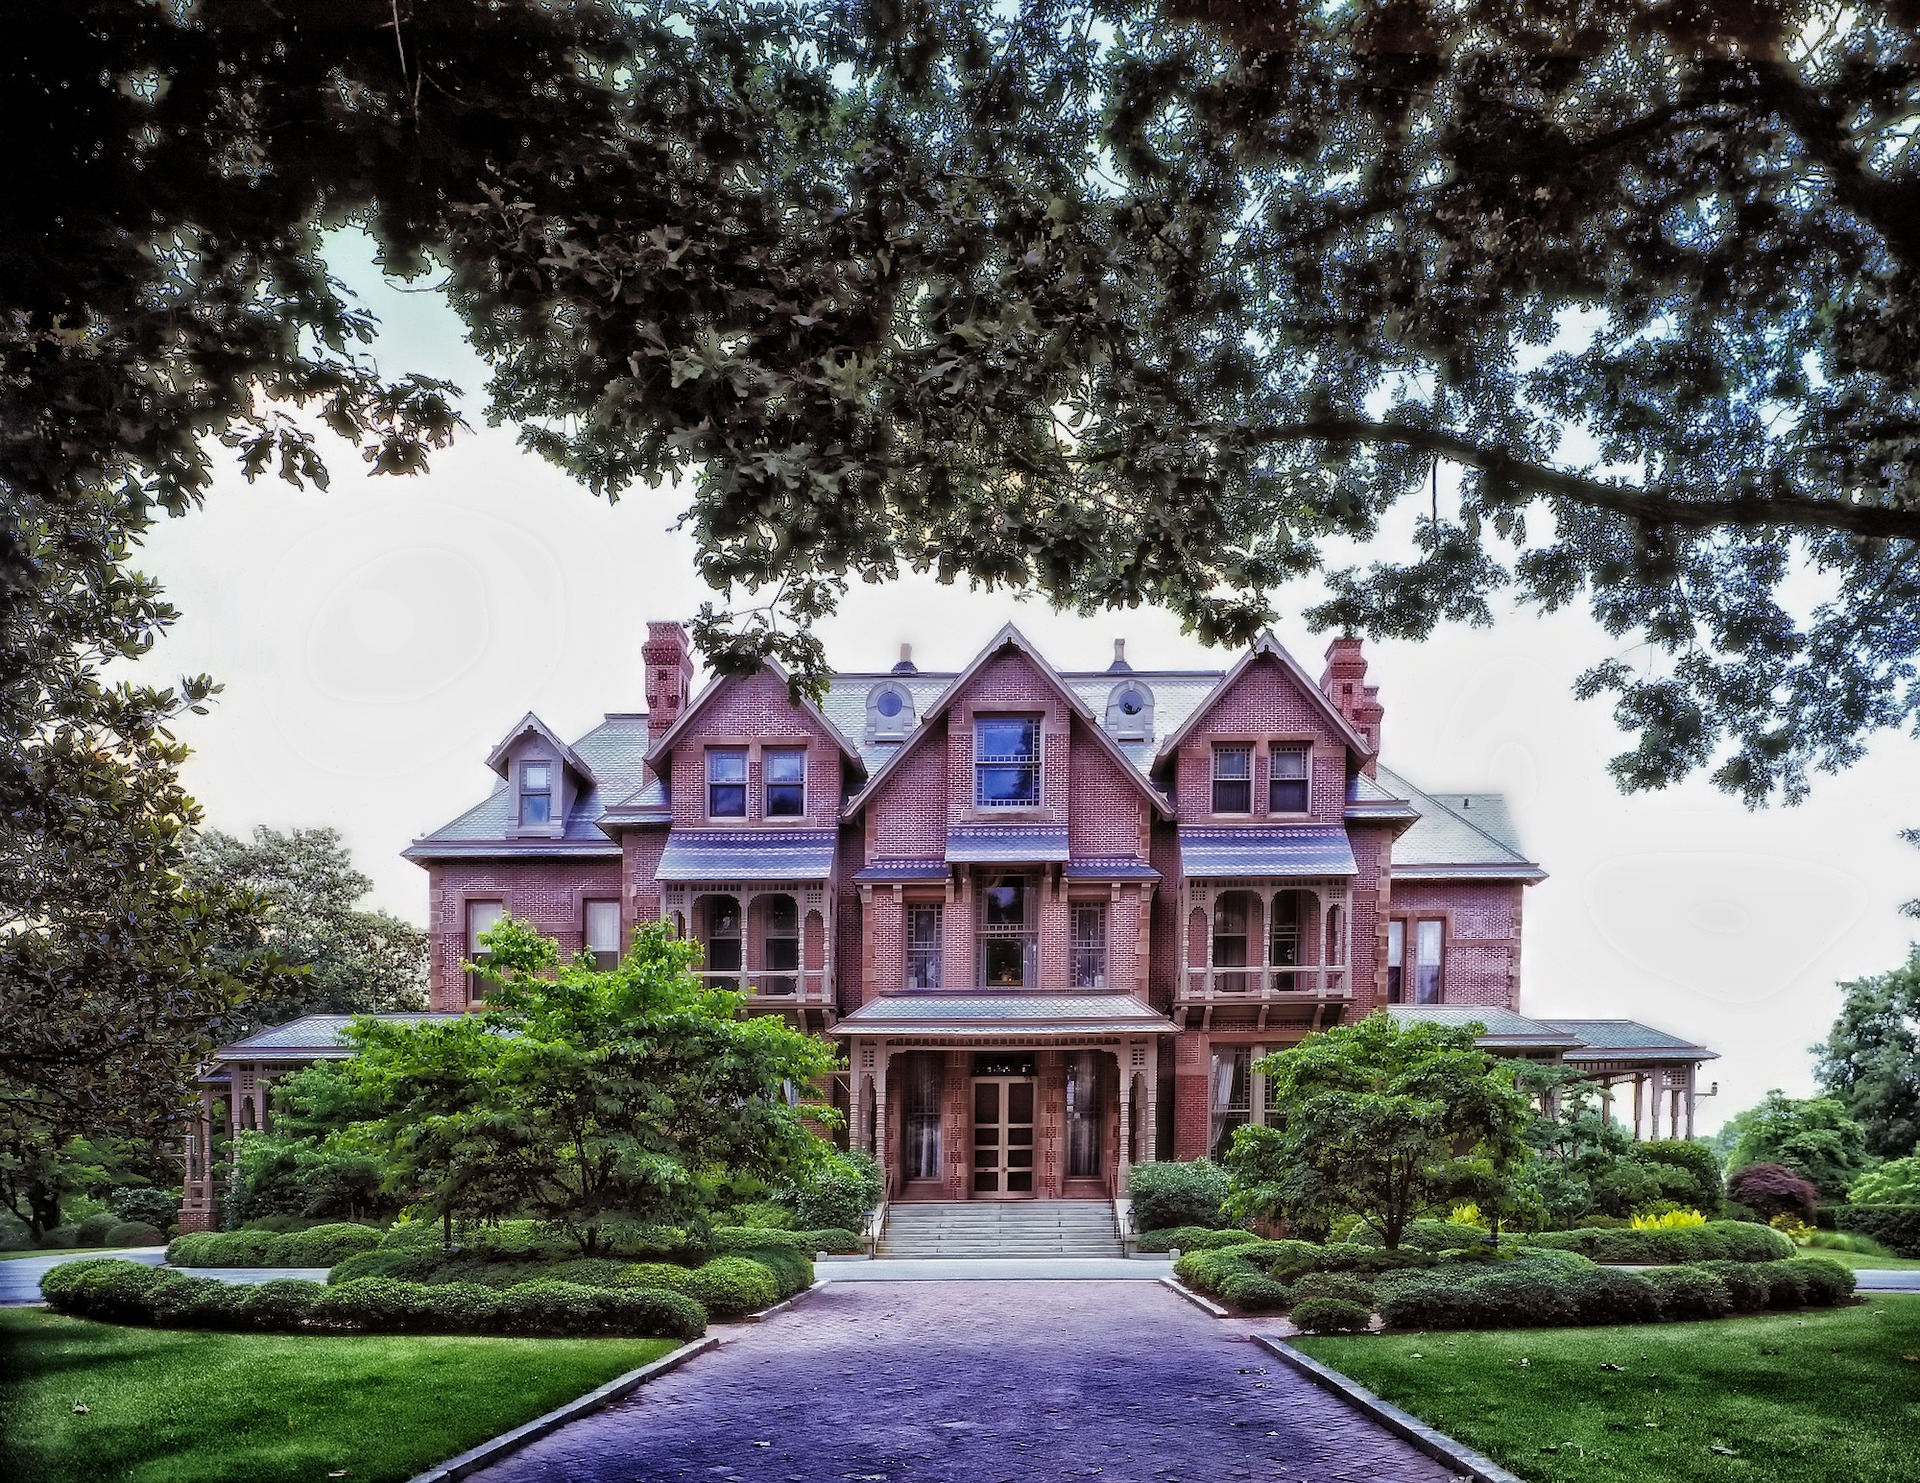 Governors mansion, Raleigh, N.C.